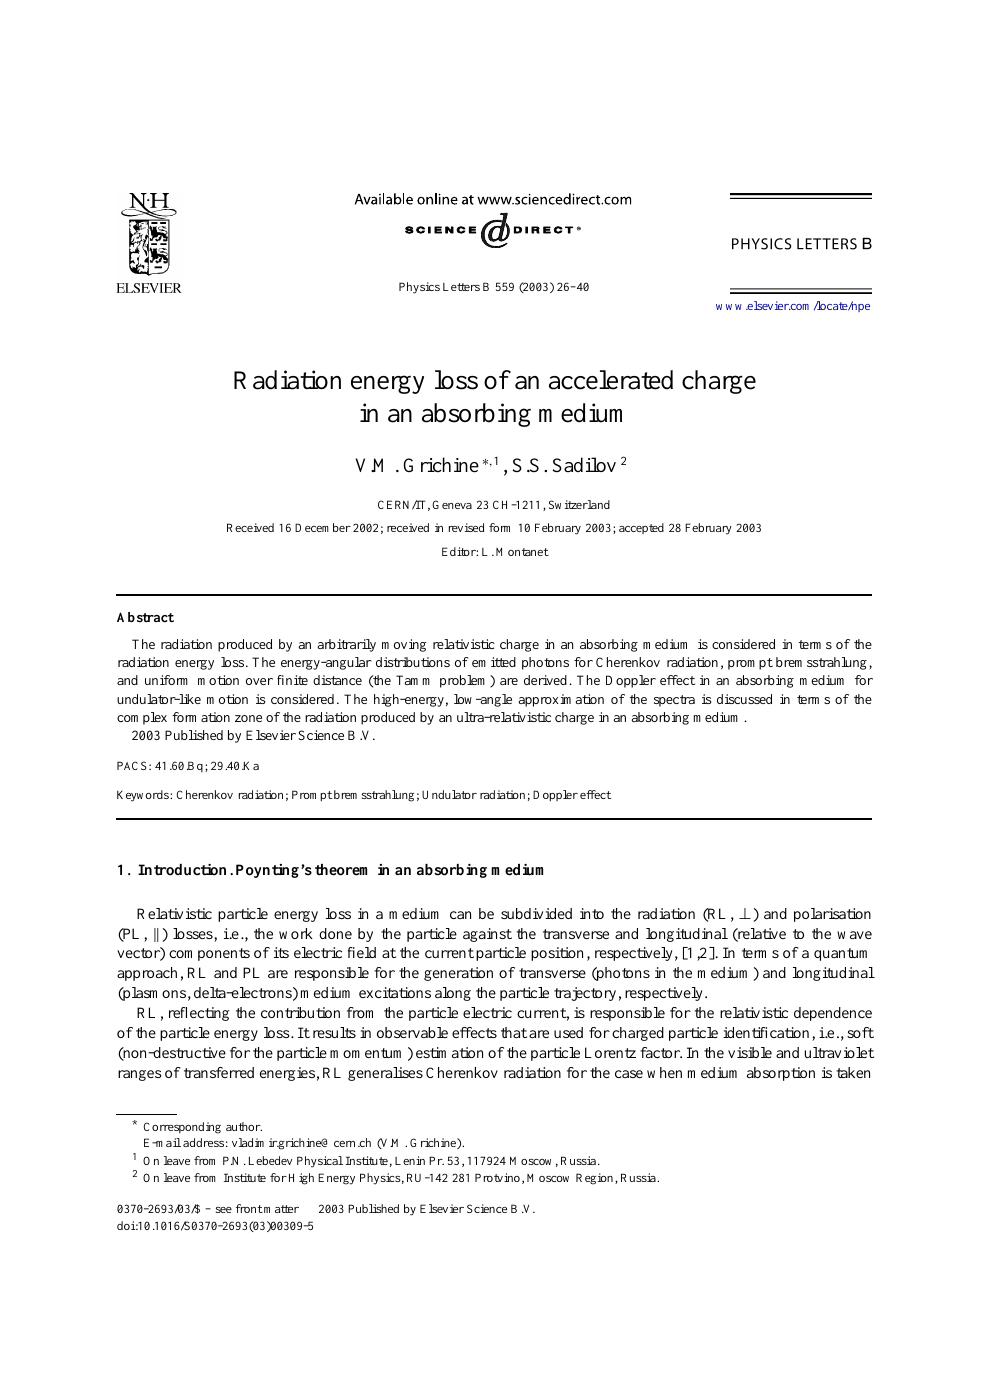 Radiation Energy Loss Of An Accelerated Charge In An Absorbing Medium Topic Of Research Paper In Physical Sciences Download Scholarly Article Pdf And Read For Free On Cyberleninka Open Science Hub